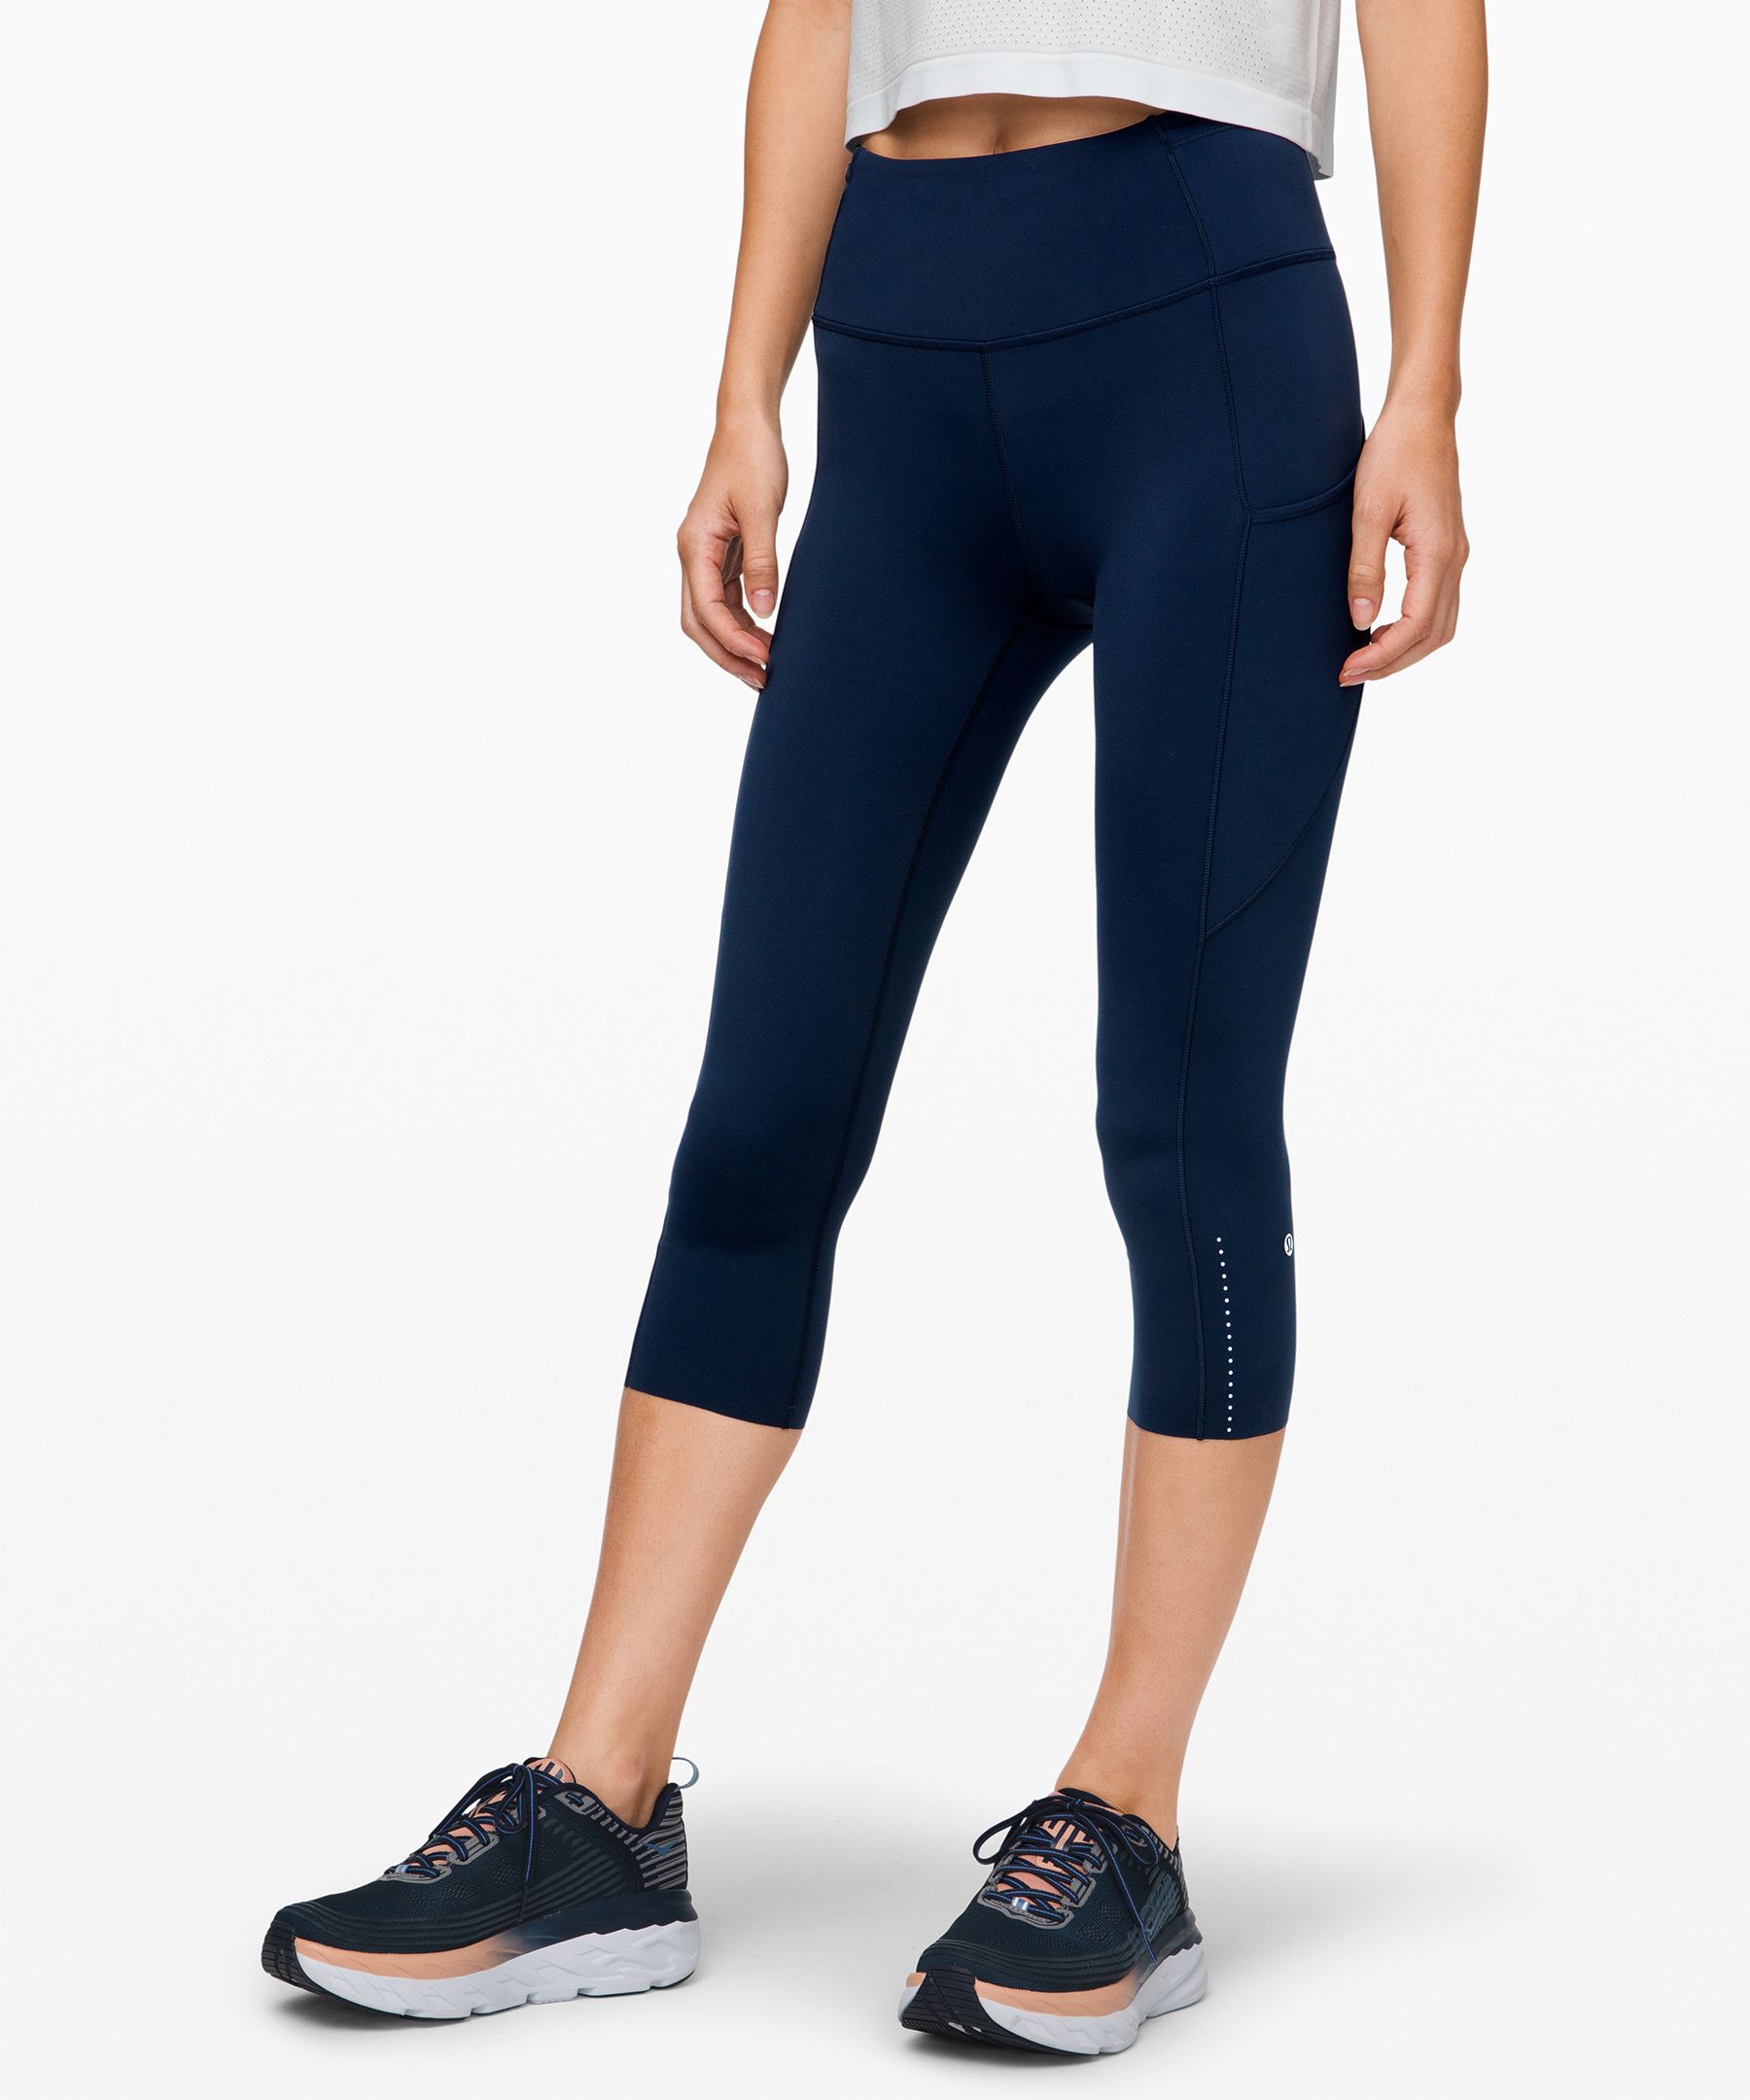 lululemon Southeast Asia - Everlux fabric, coming in hot. New